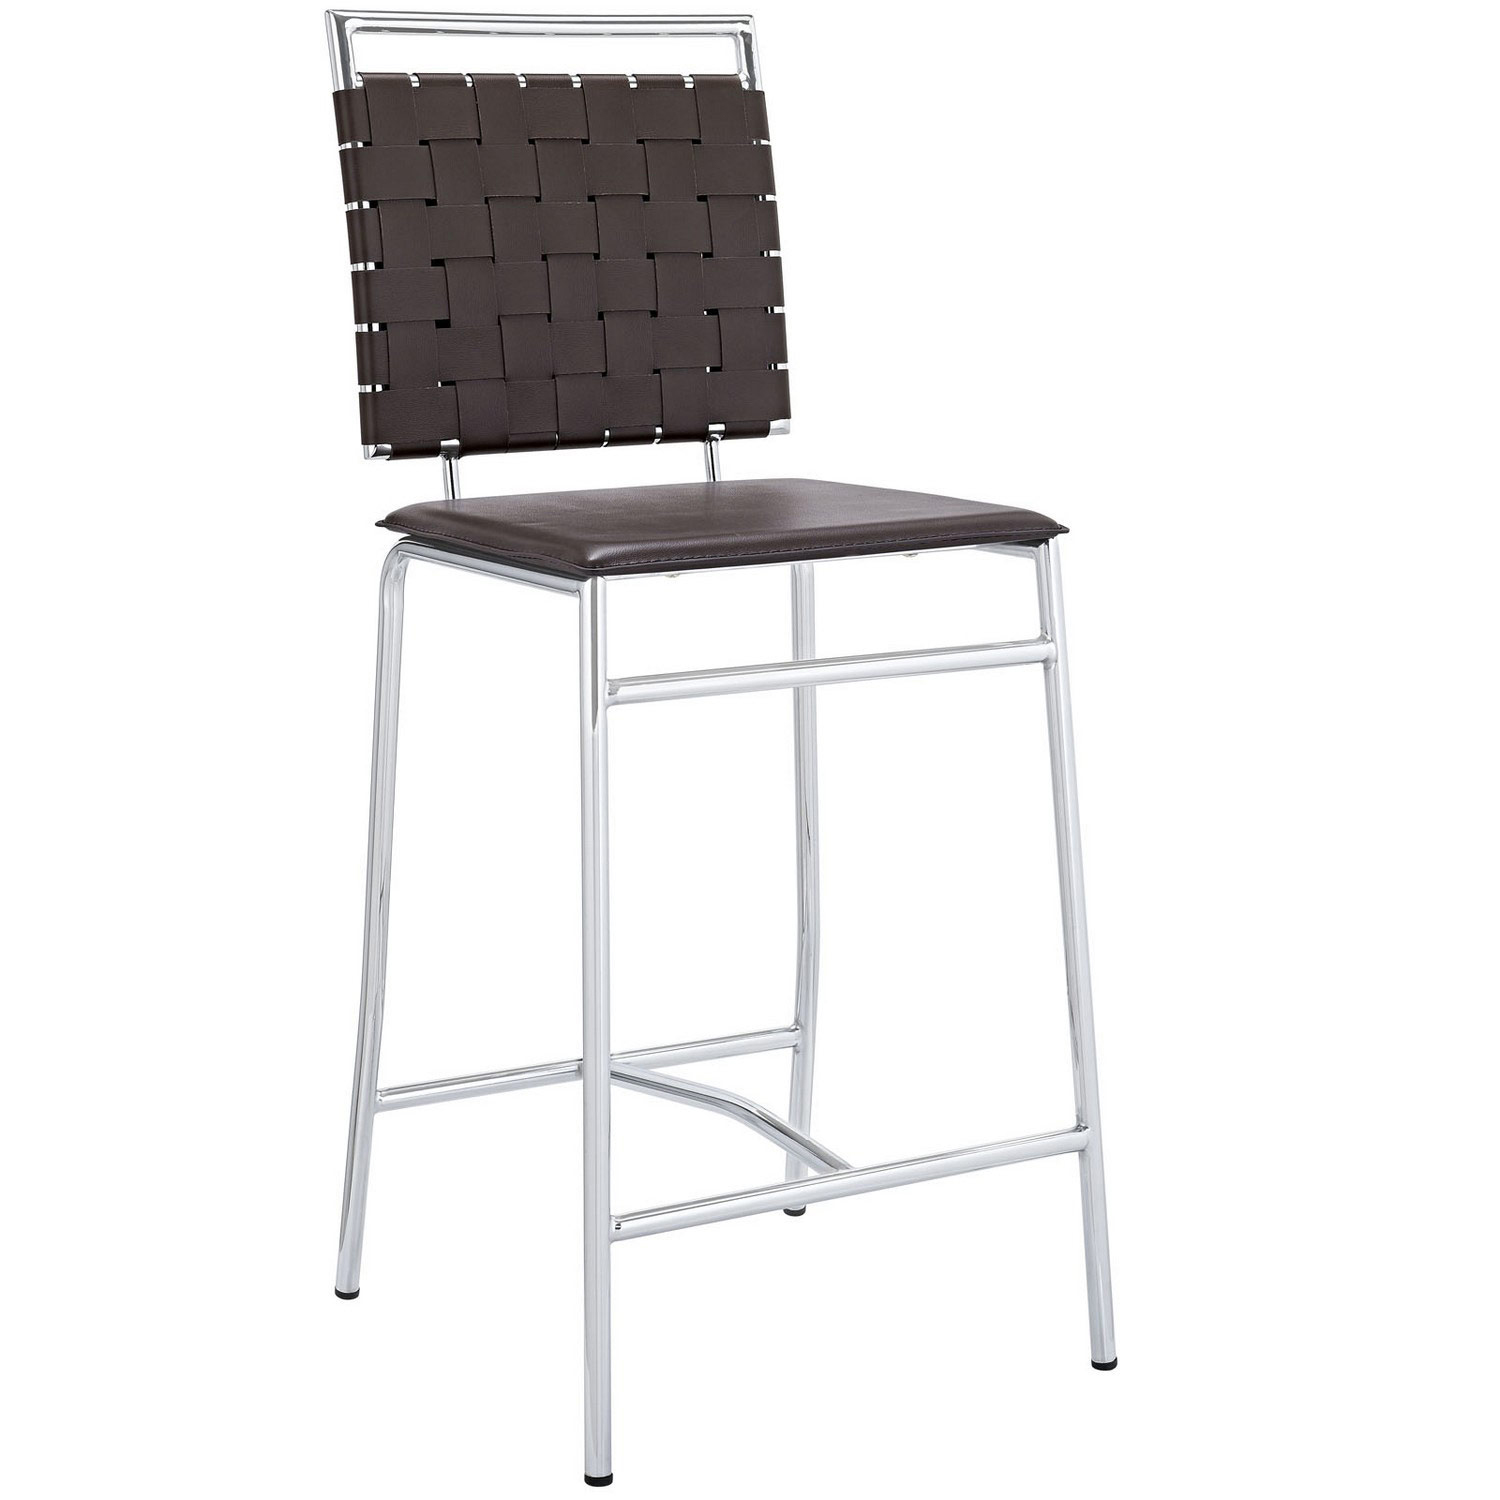 Modway Fuse Counter Stool - Brown